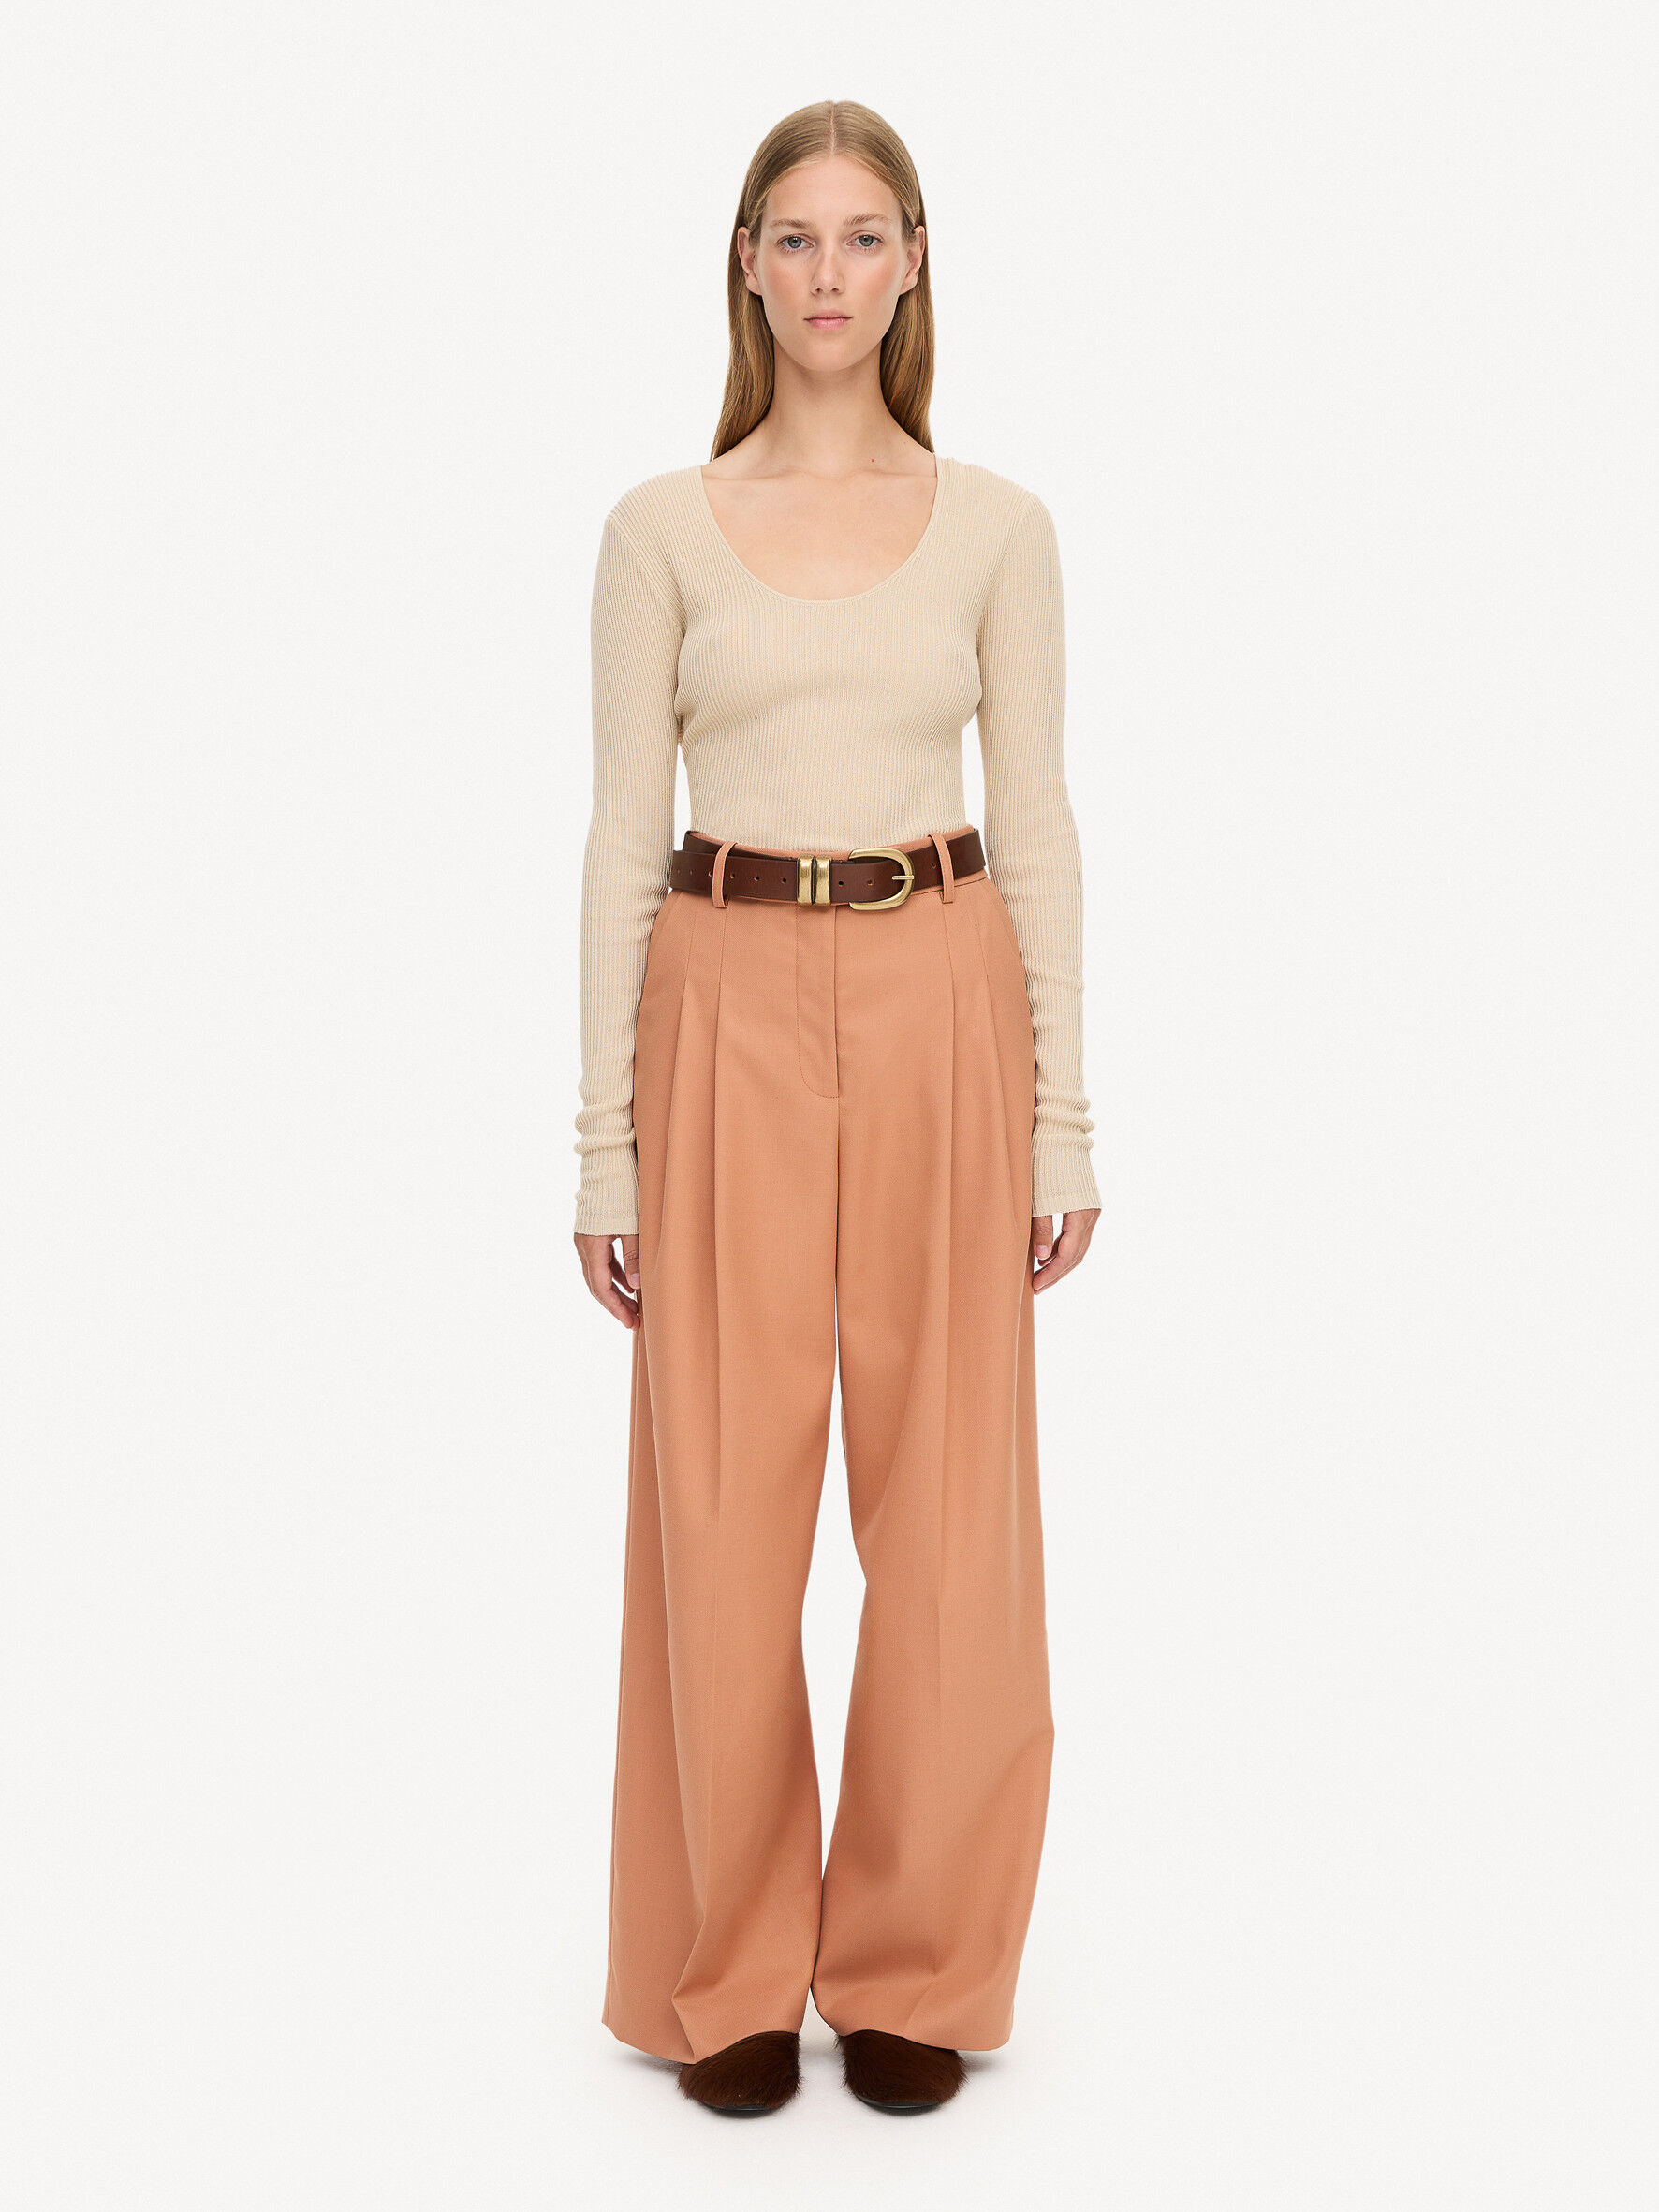 Tapered High Rise Trousers - Beige - High Waisted Trousers - Other Stories  | Women high waist pants, High waisted pants, High waisted trousers